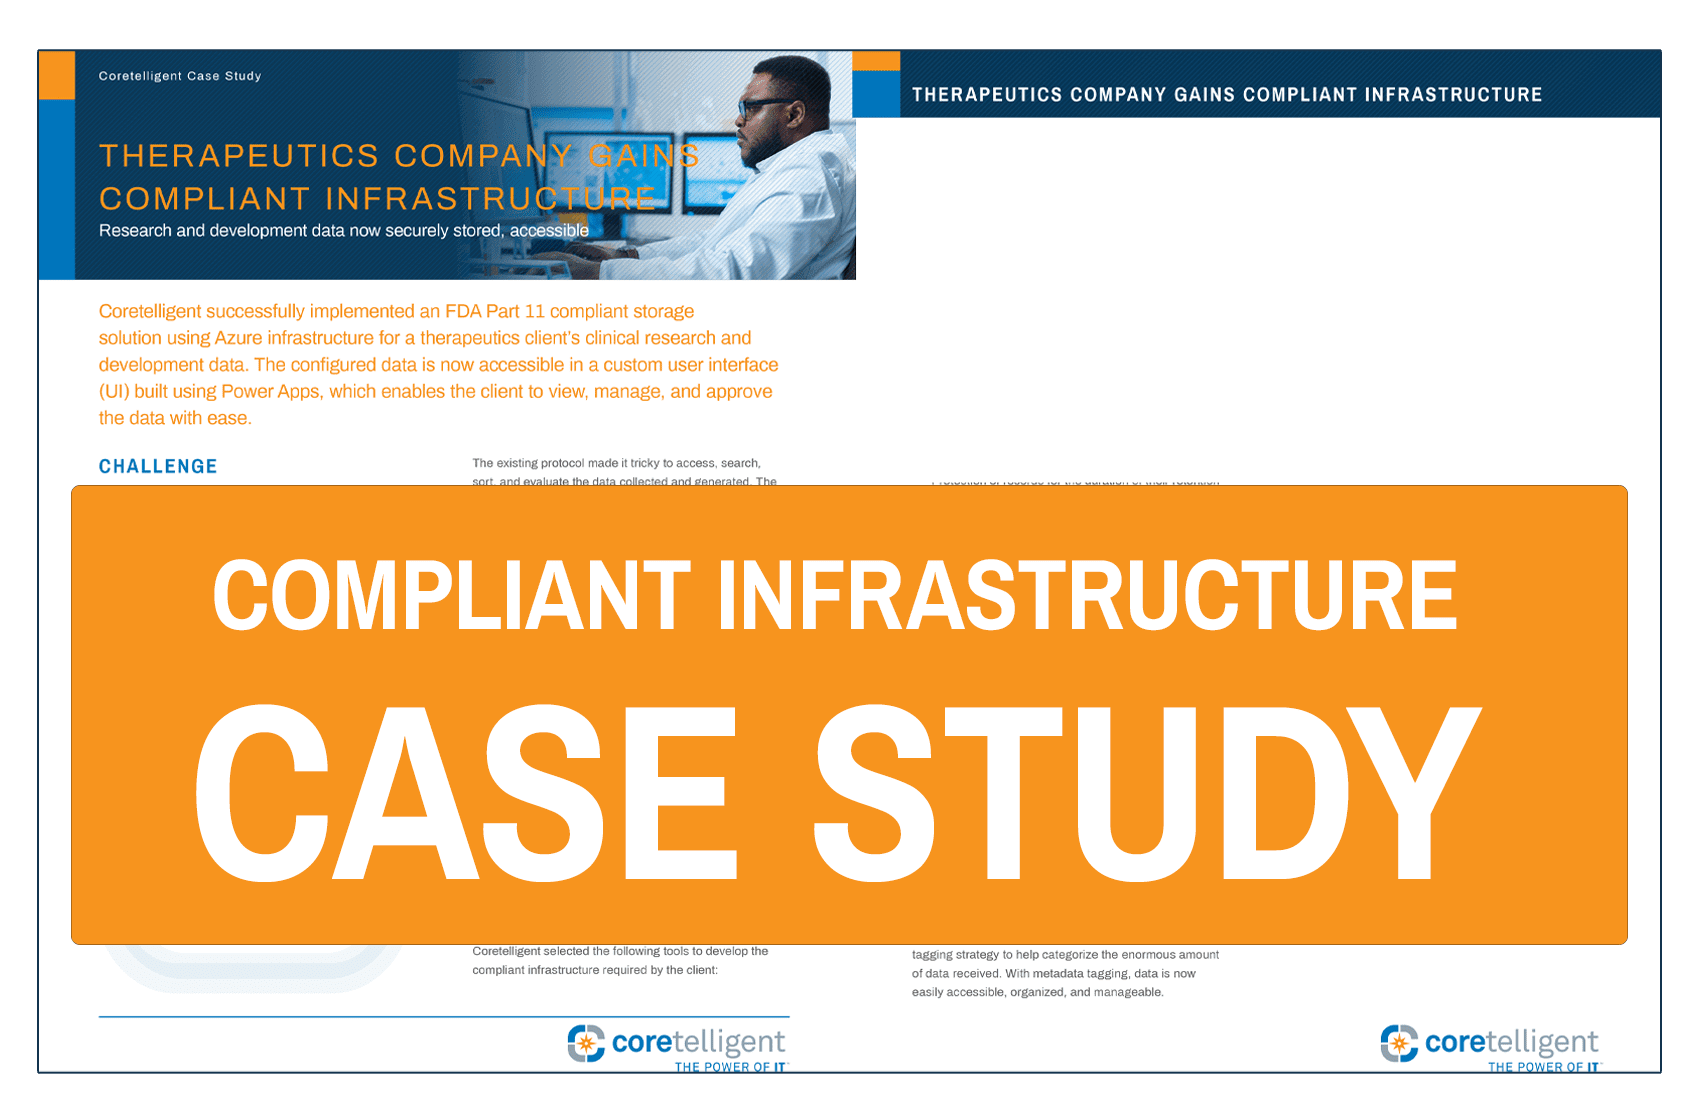 Compliant Infrastructure Case Study